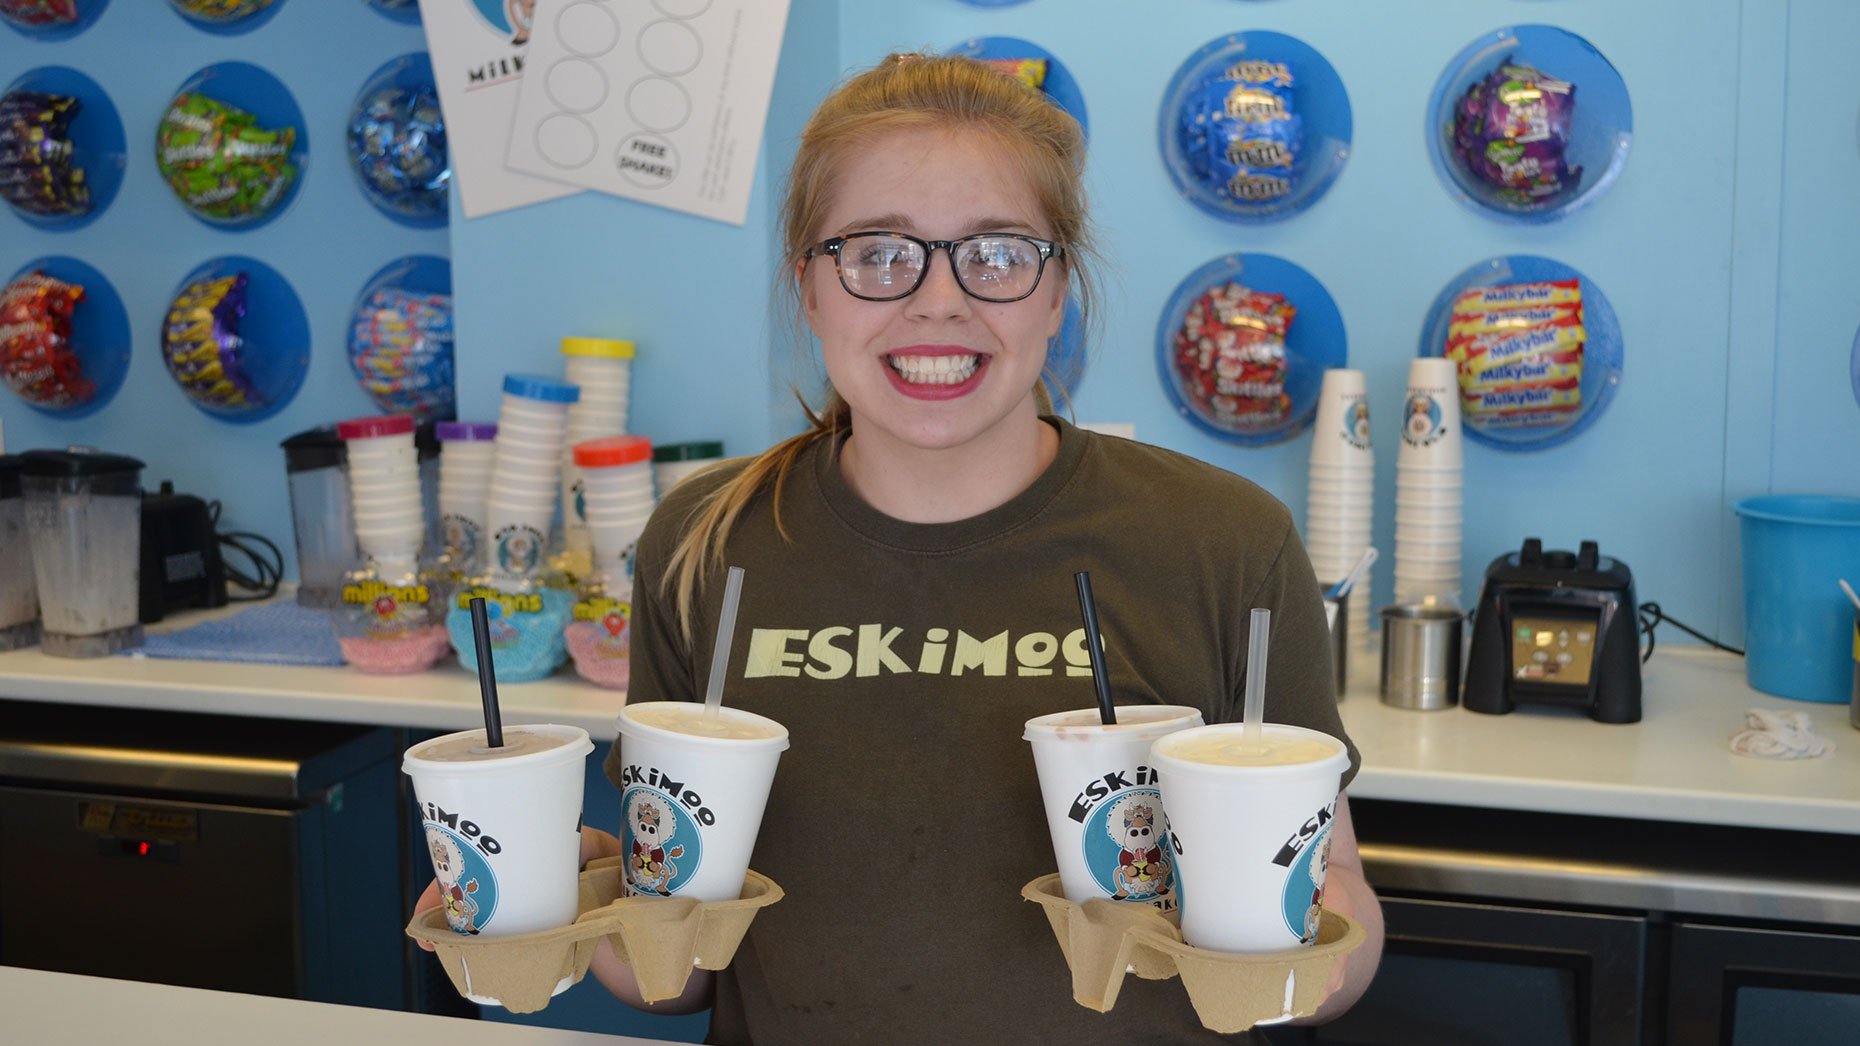 Eskimoo Milkshakes is one of 18 eateries in Lincoln to sign up to the new Deliveroo service. Photo: Sarah Harrison-Barker